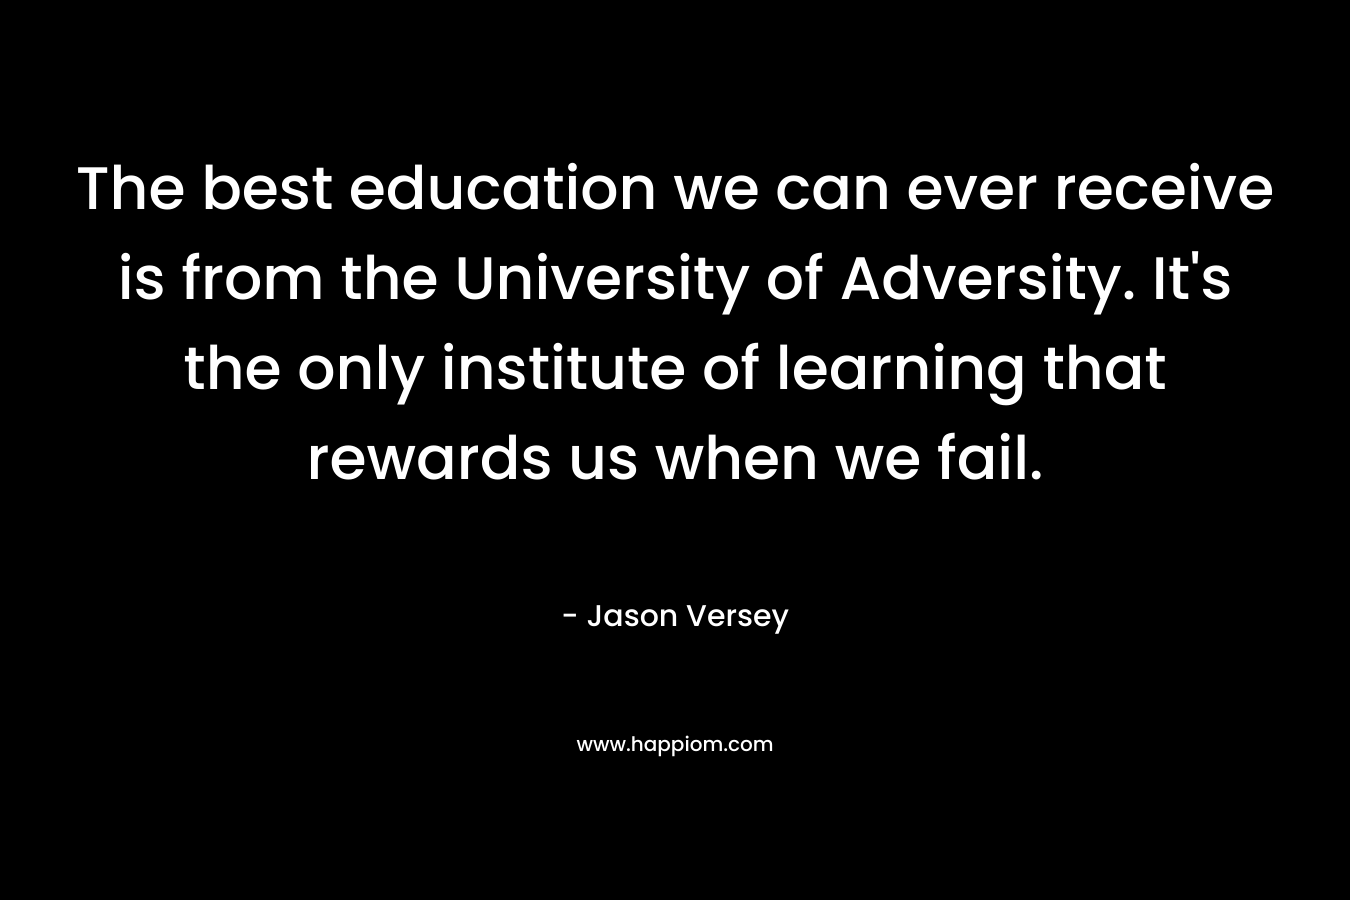 The best education we can ever receive is from the University of Adversity. It’s the only institute of learning that rewards us when we fail. – Jason Versey